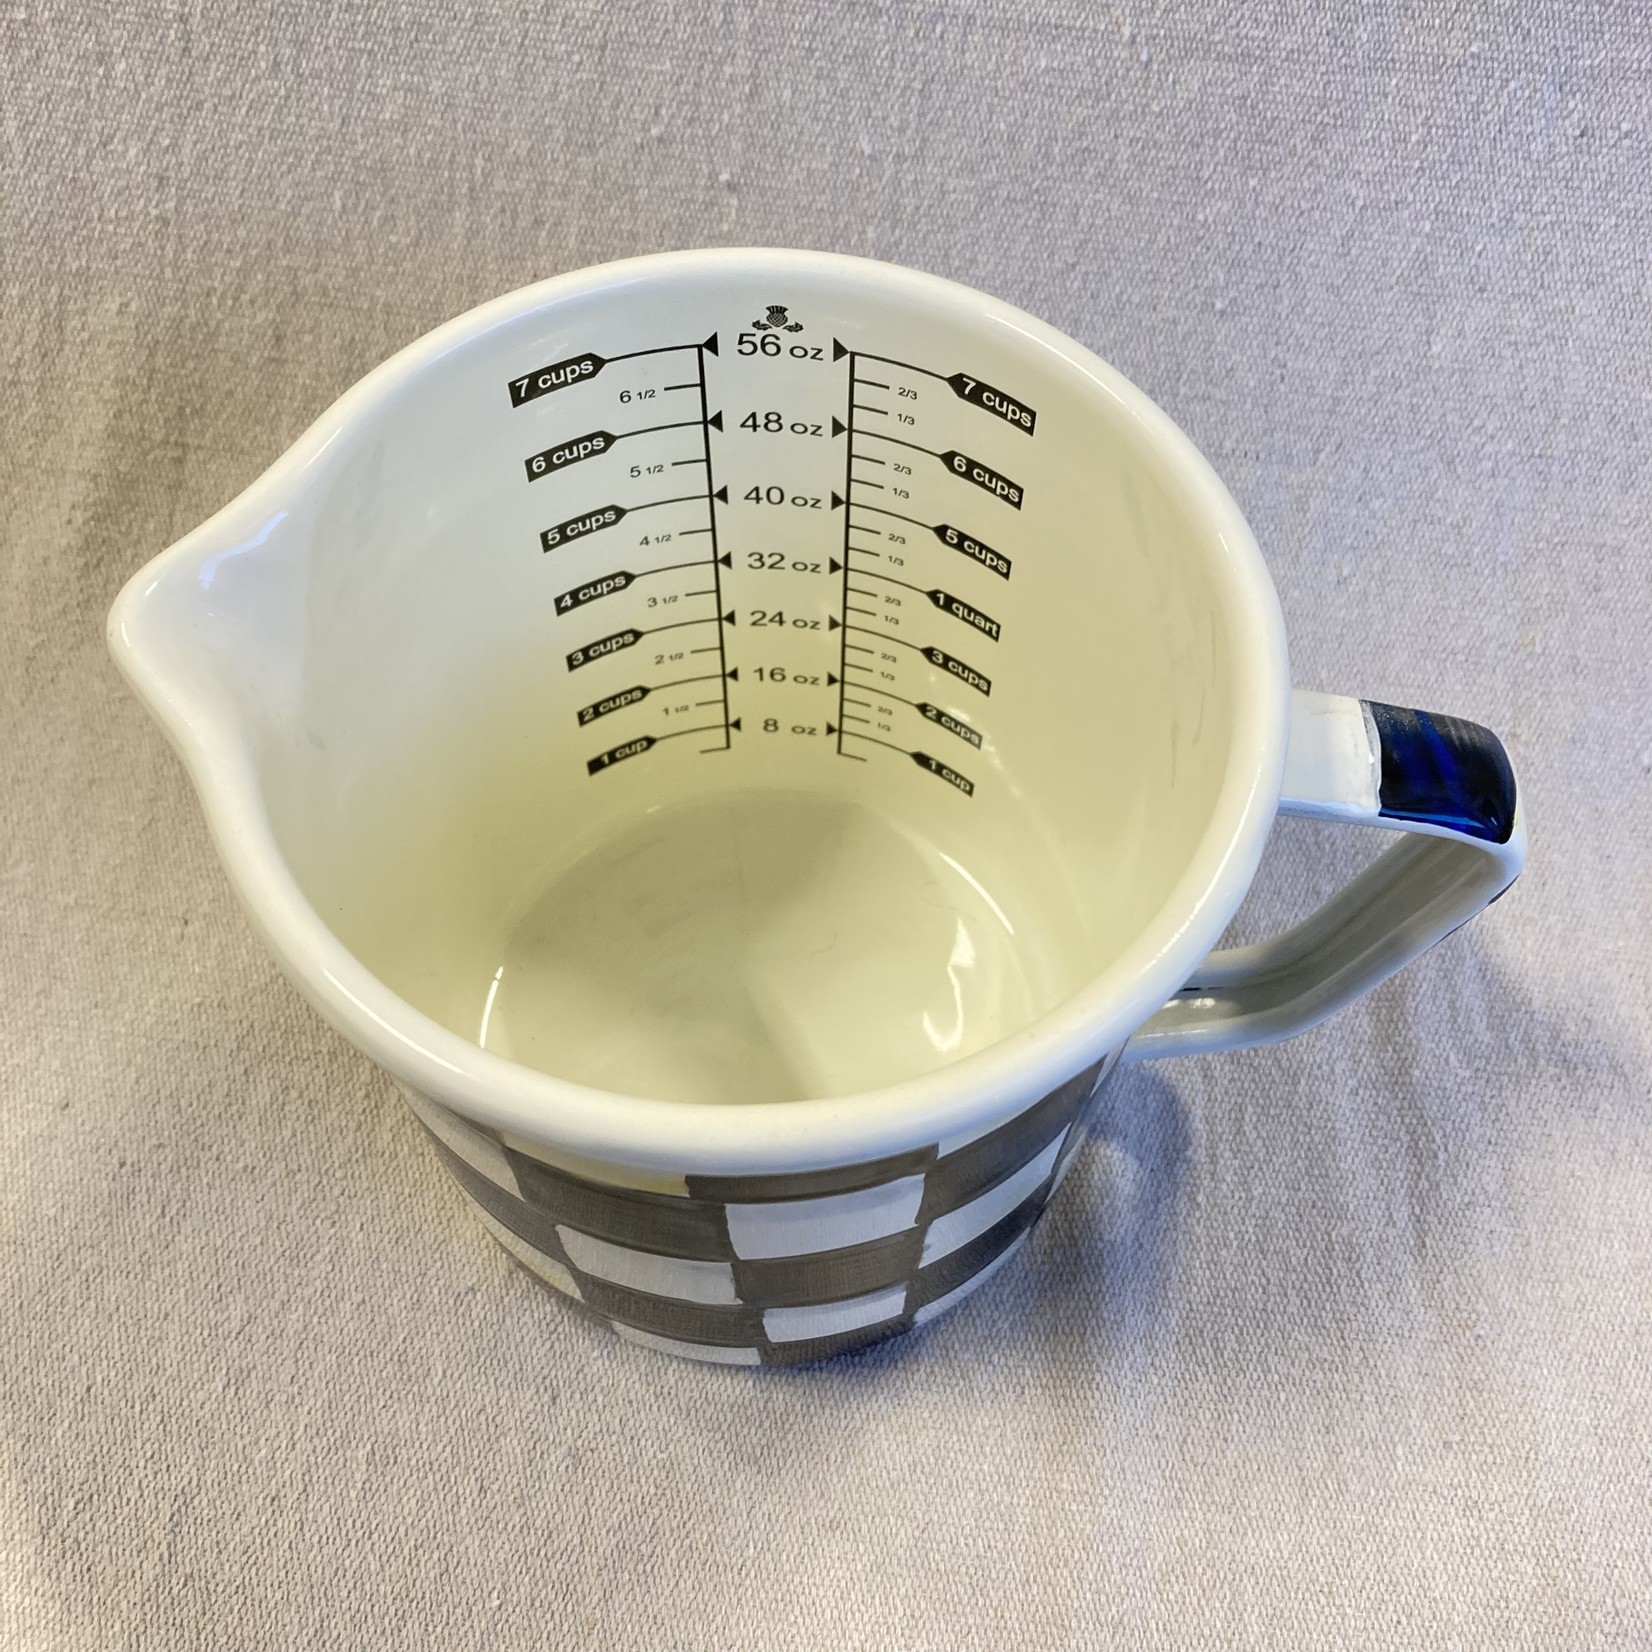 MacKenzie-Childs Courtly Check Enamel 7 Cup Measuring Cup